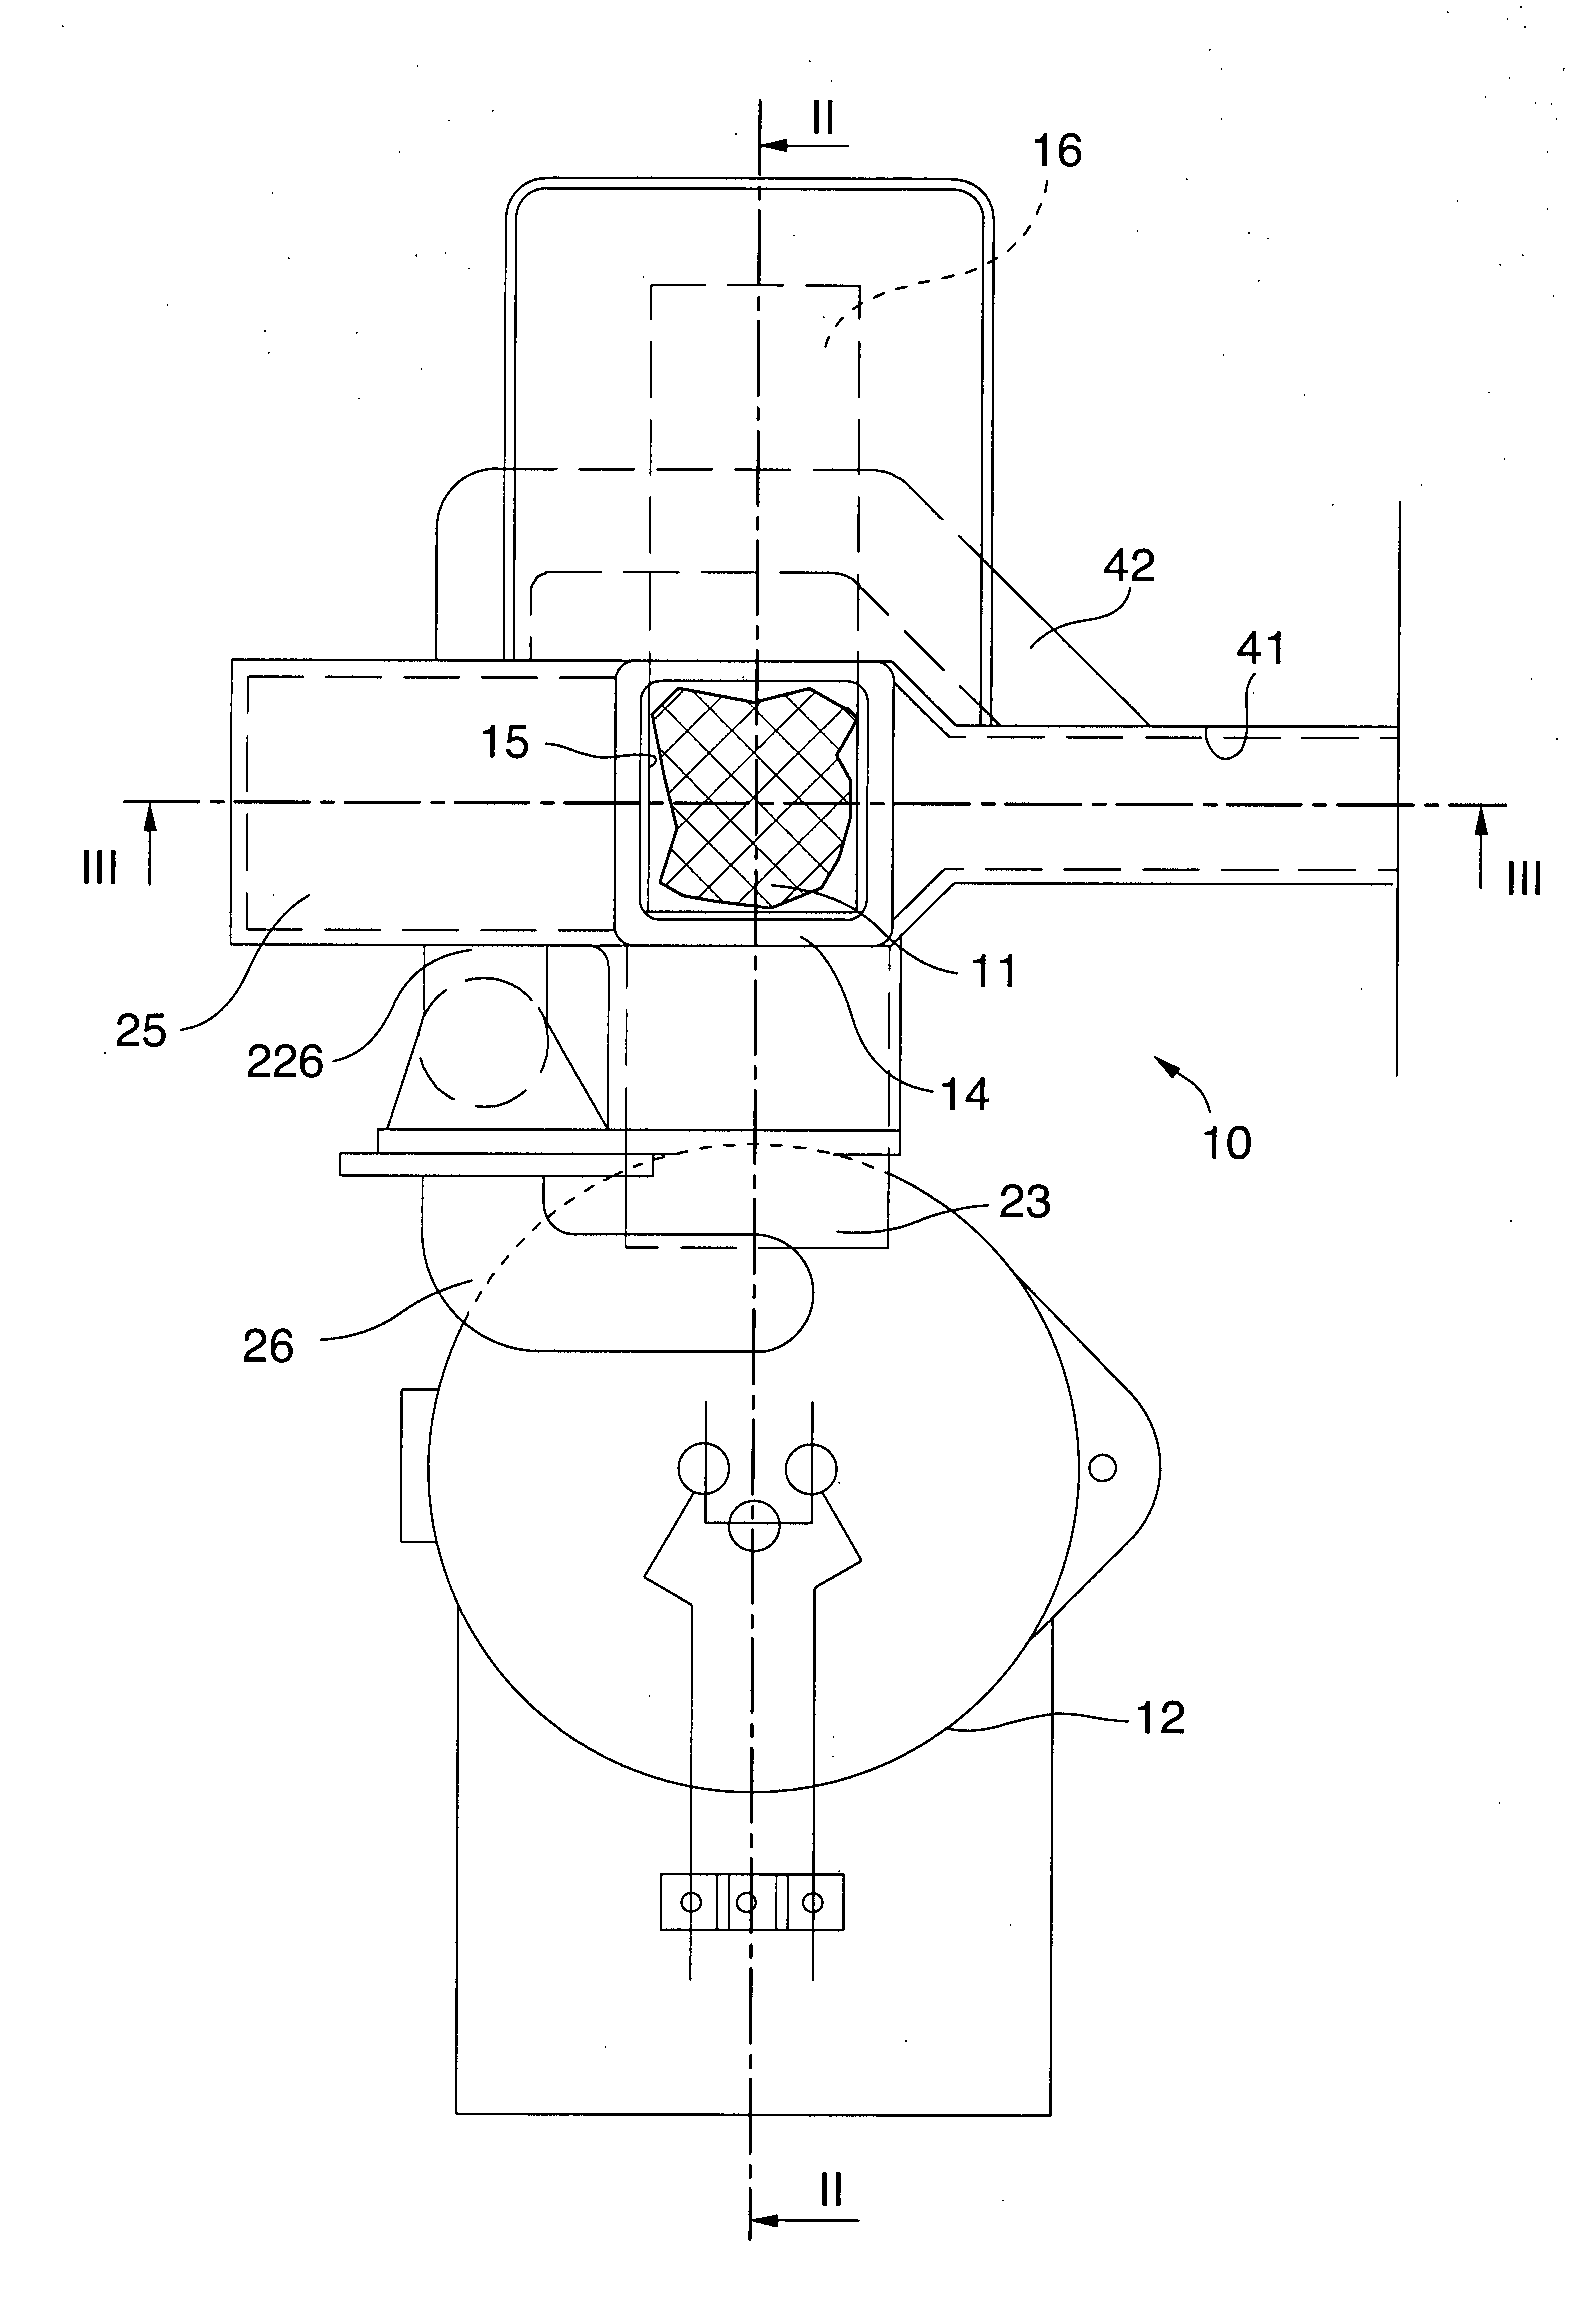 Apparatus and method to feed and preheat a metal charge to a melting furnace